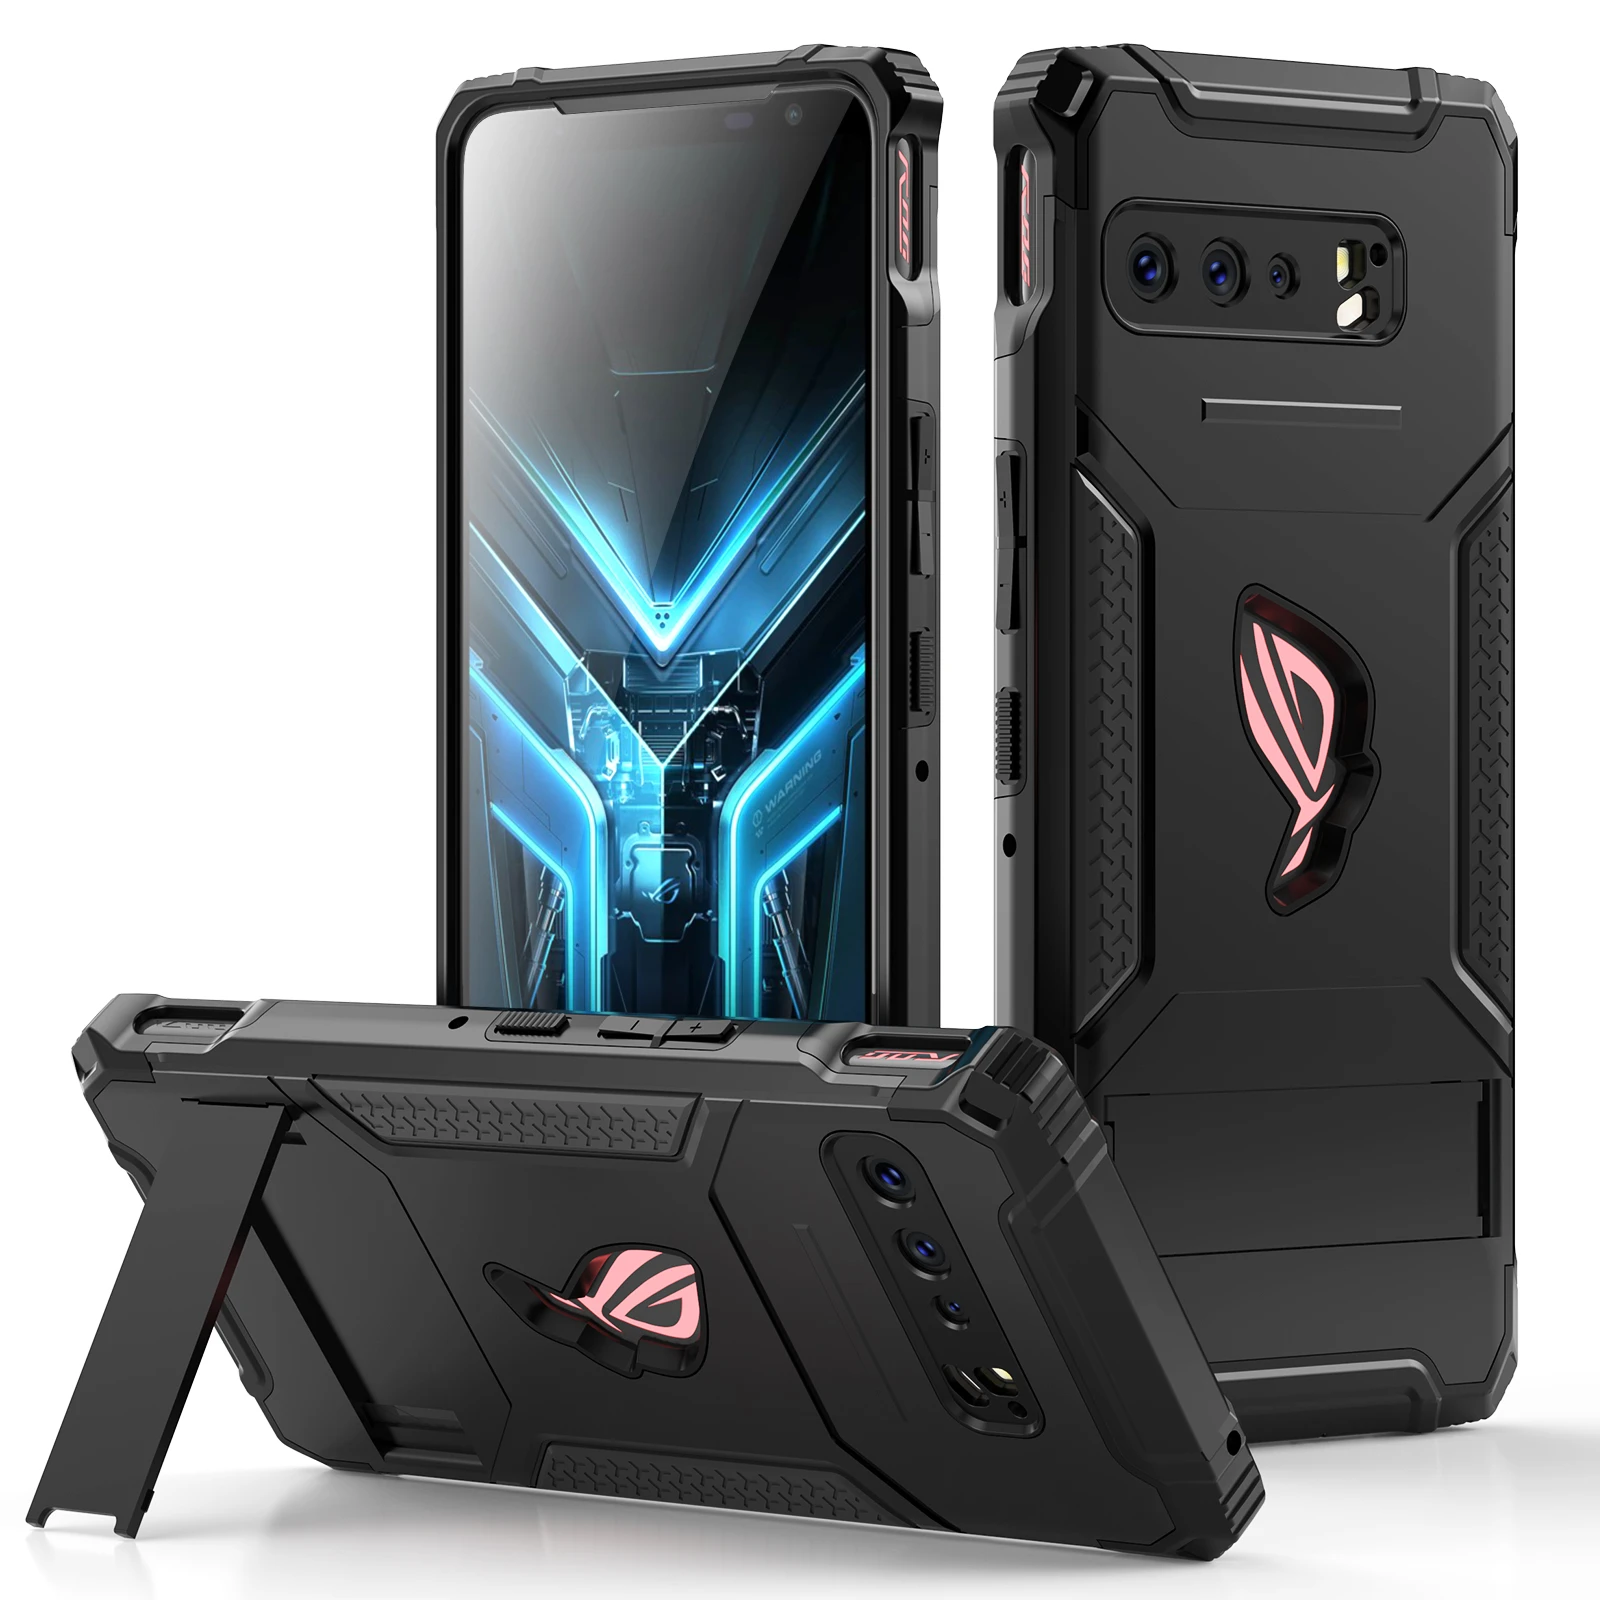 ZSHOW Armour Case for ASUS ROG Phone 3 Case Air Trigger Compatible with Kickstand and Dust Plug Military Grade Drop Protection